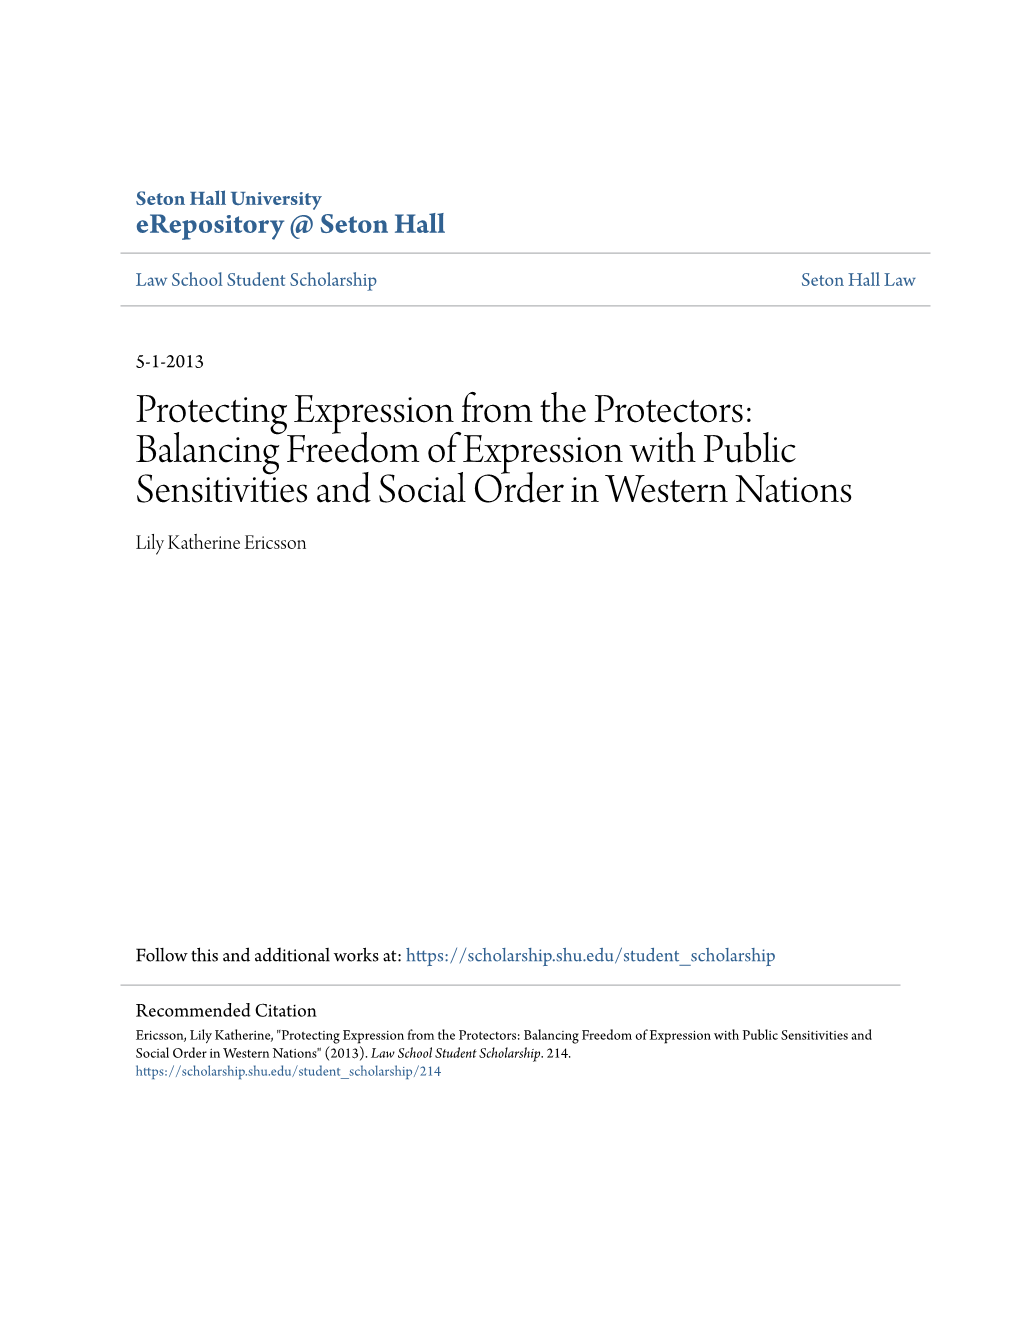 Protecting Expression from the Protectors: Balancing Freedom of Expression with Public Sensitivities and Social Order in Western Nations Lily Katherine Ericsson